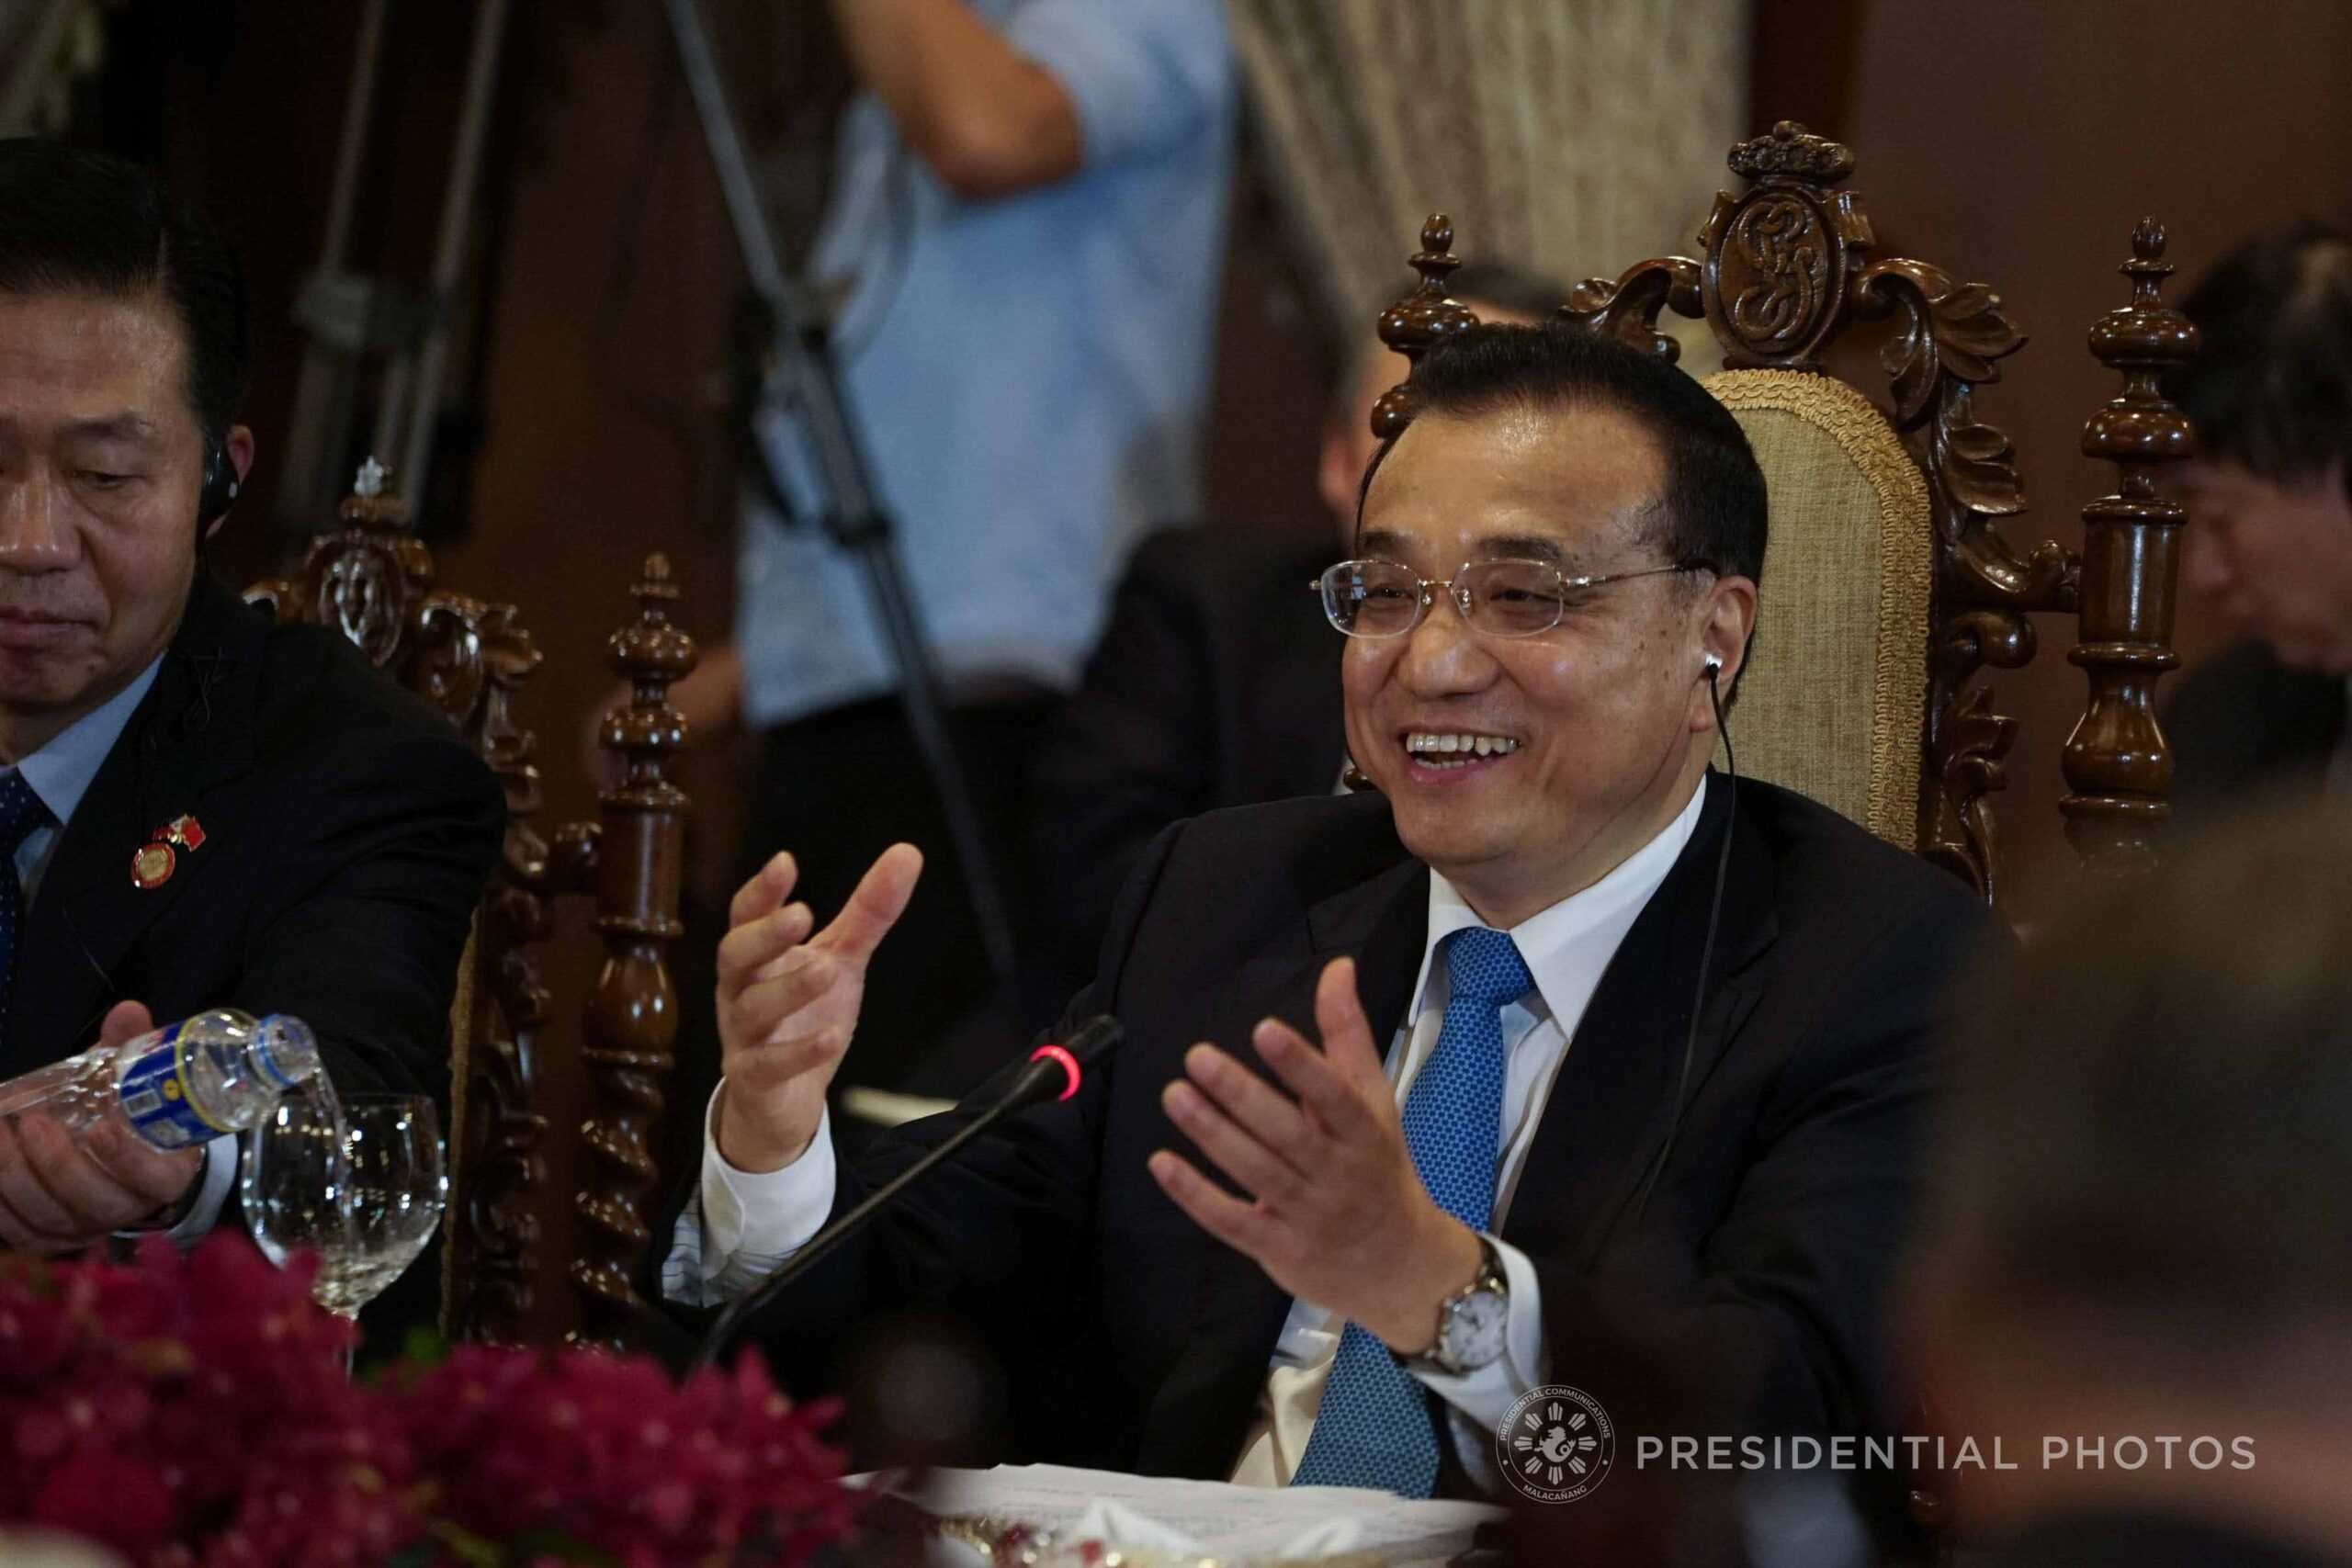 Chinese premier visits city at epicenter of virus